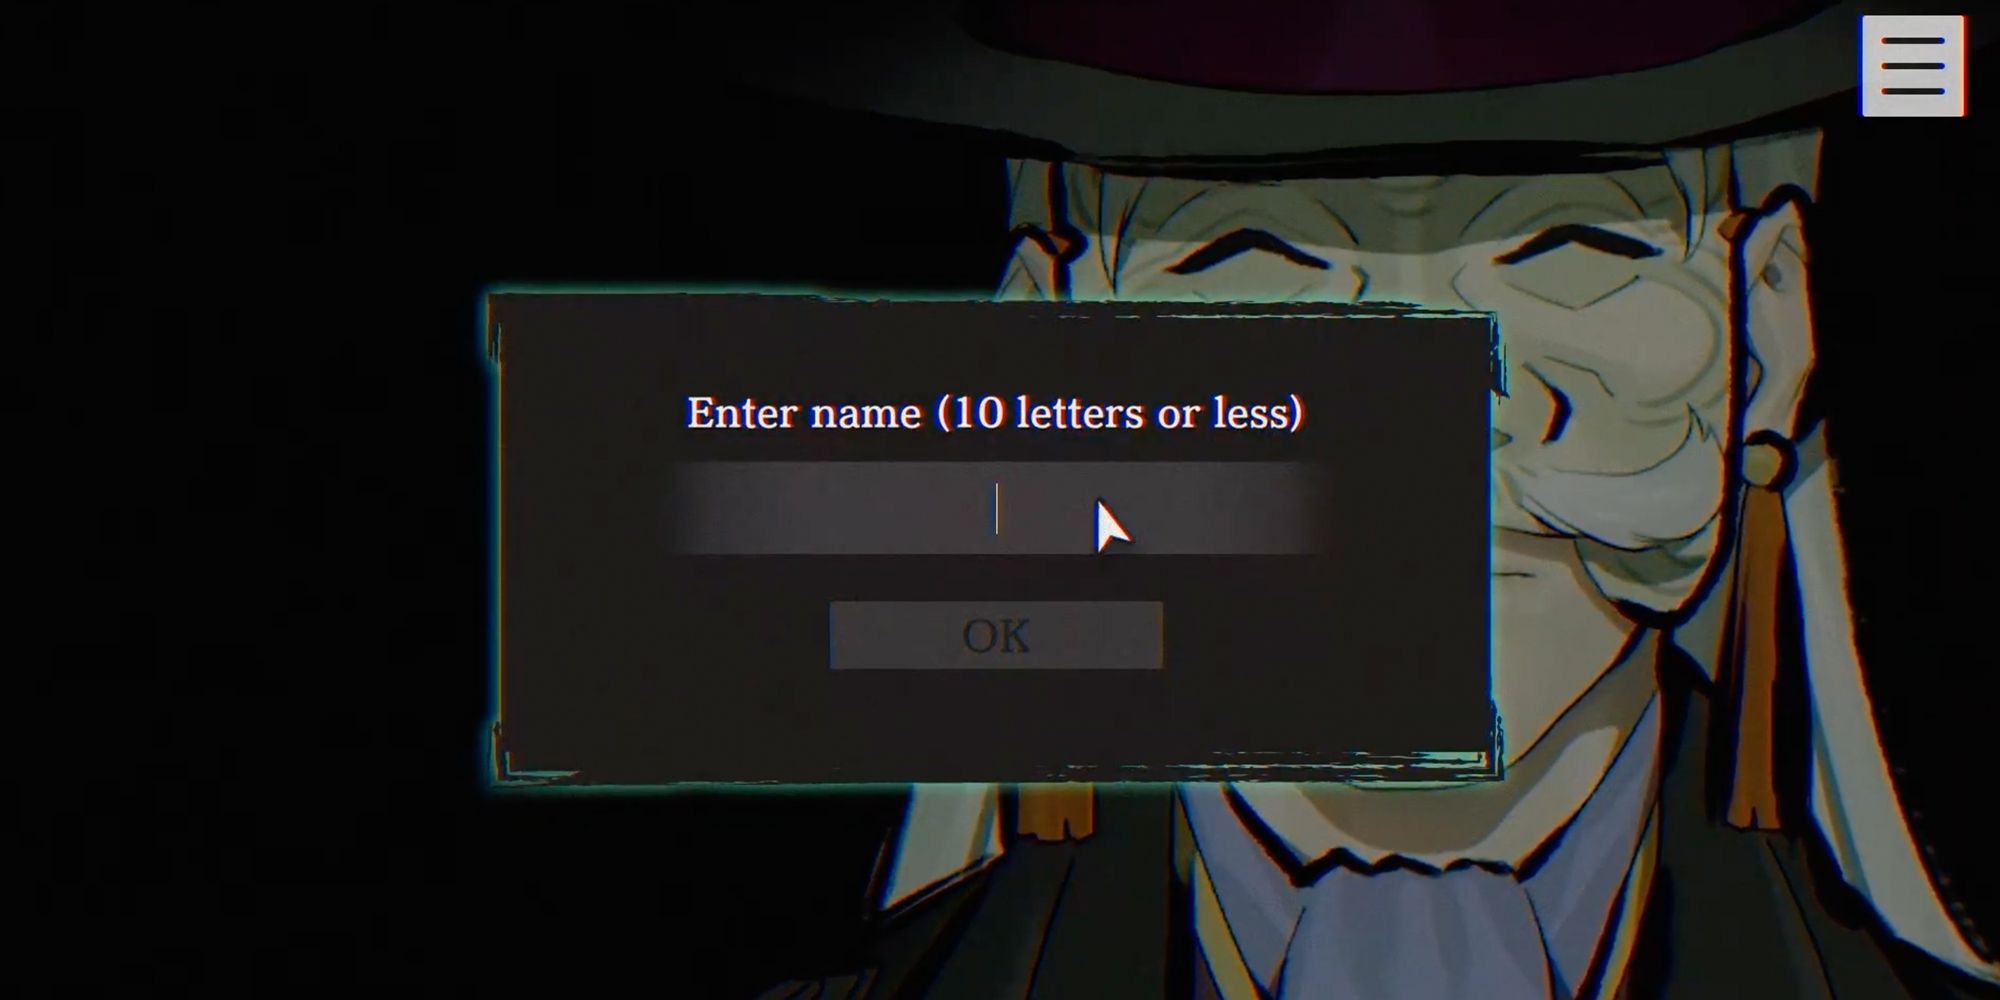 The Paranormasight narrator prompts the player to enter their name.